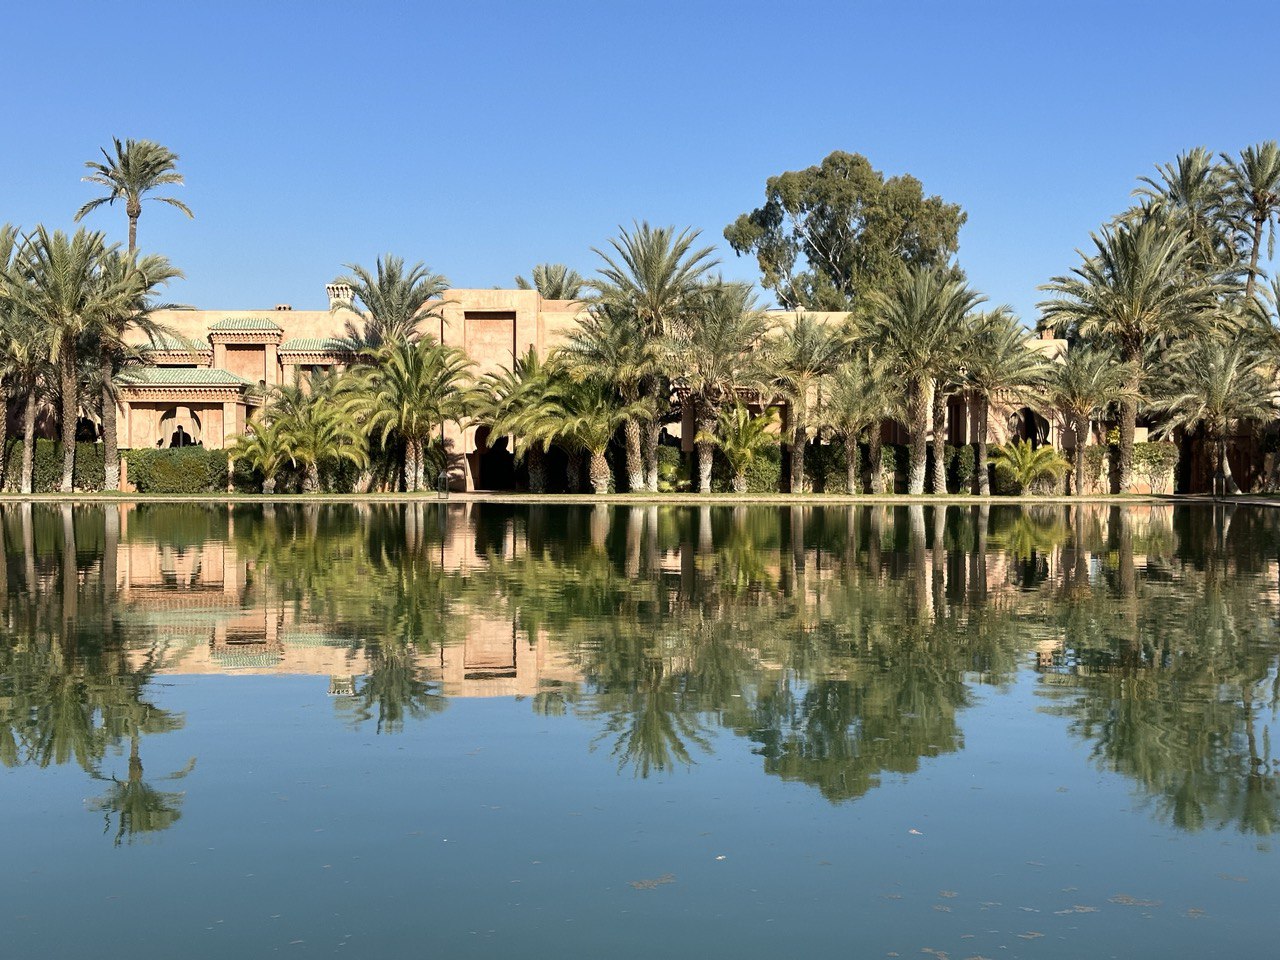 Surrounded by lush greenery and refreshing pools, Amanjena stands as the very embodiment of a desert oasis